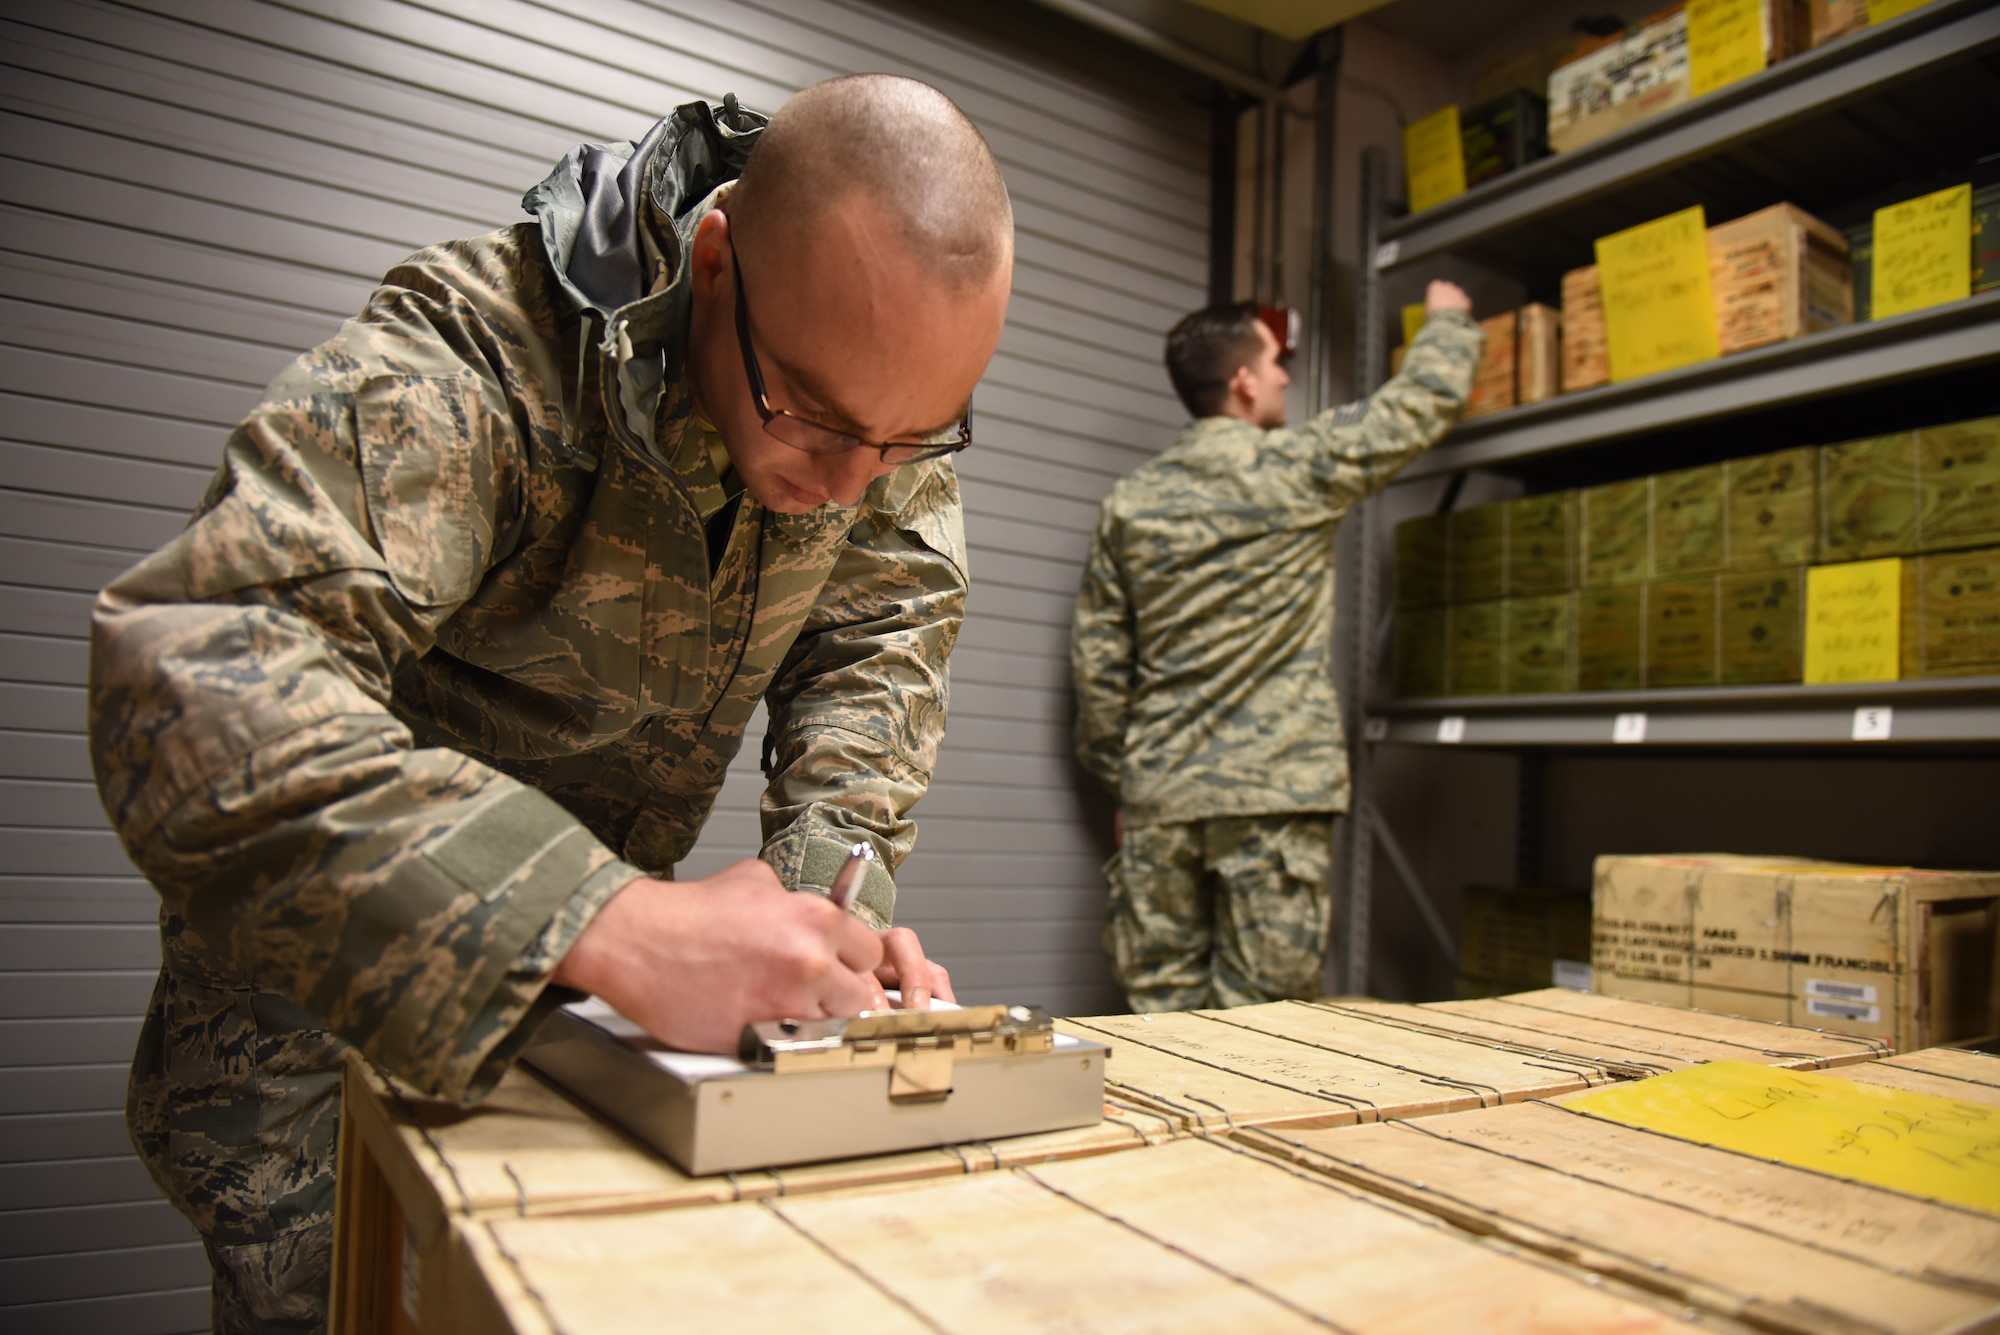 Staff Sgt. Matthew Hohe, quality assurance inspector of the munitions flight with the 911th Maintenance Squadron, inventories munitions with the help of his coworker Tech. Sgt. William Fedorek, munitions inspector of the munitions flight, at the Pittsburgh International Air Reserve Station, Pennsylvania, March 3, 2016. Munitions inventory is done in pairs rather than alone to ensure accuracy. (U.S. Air Force photo by Airman Bethany Feenstra)